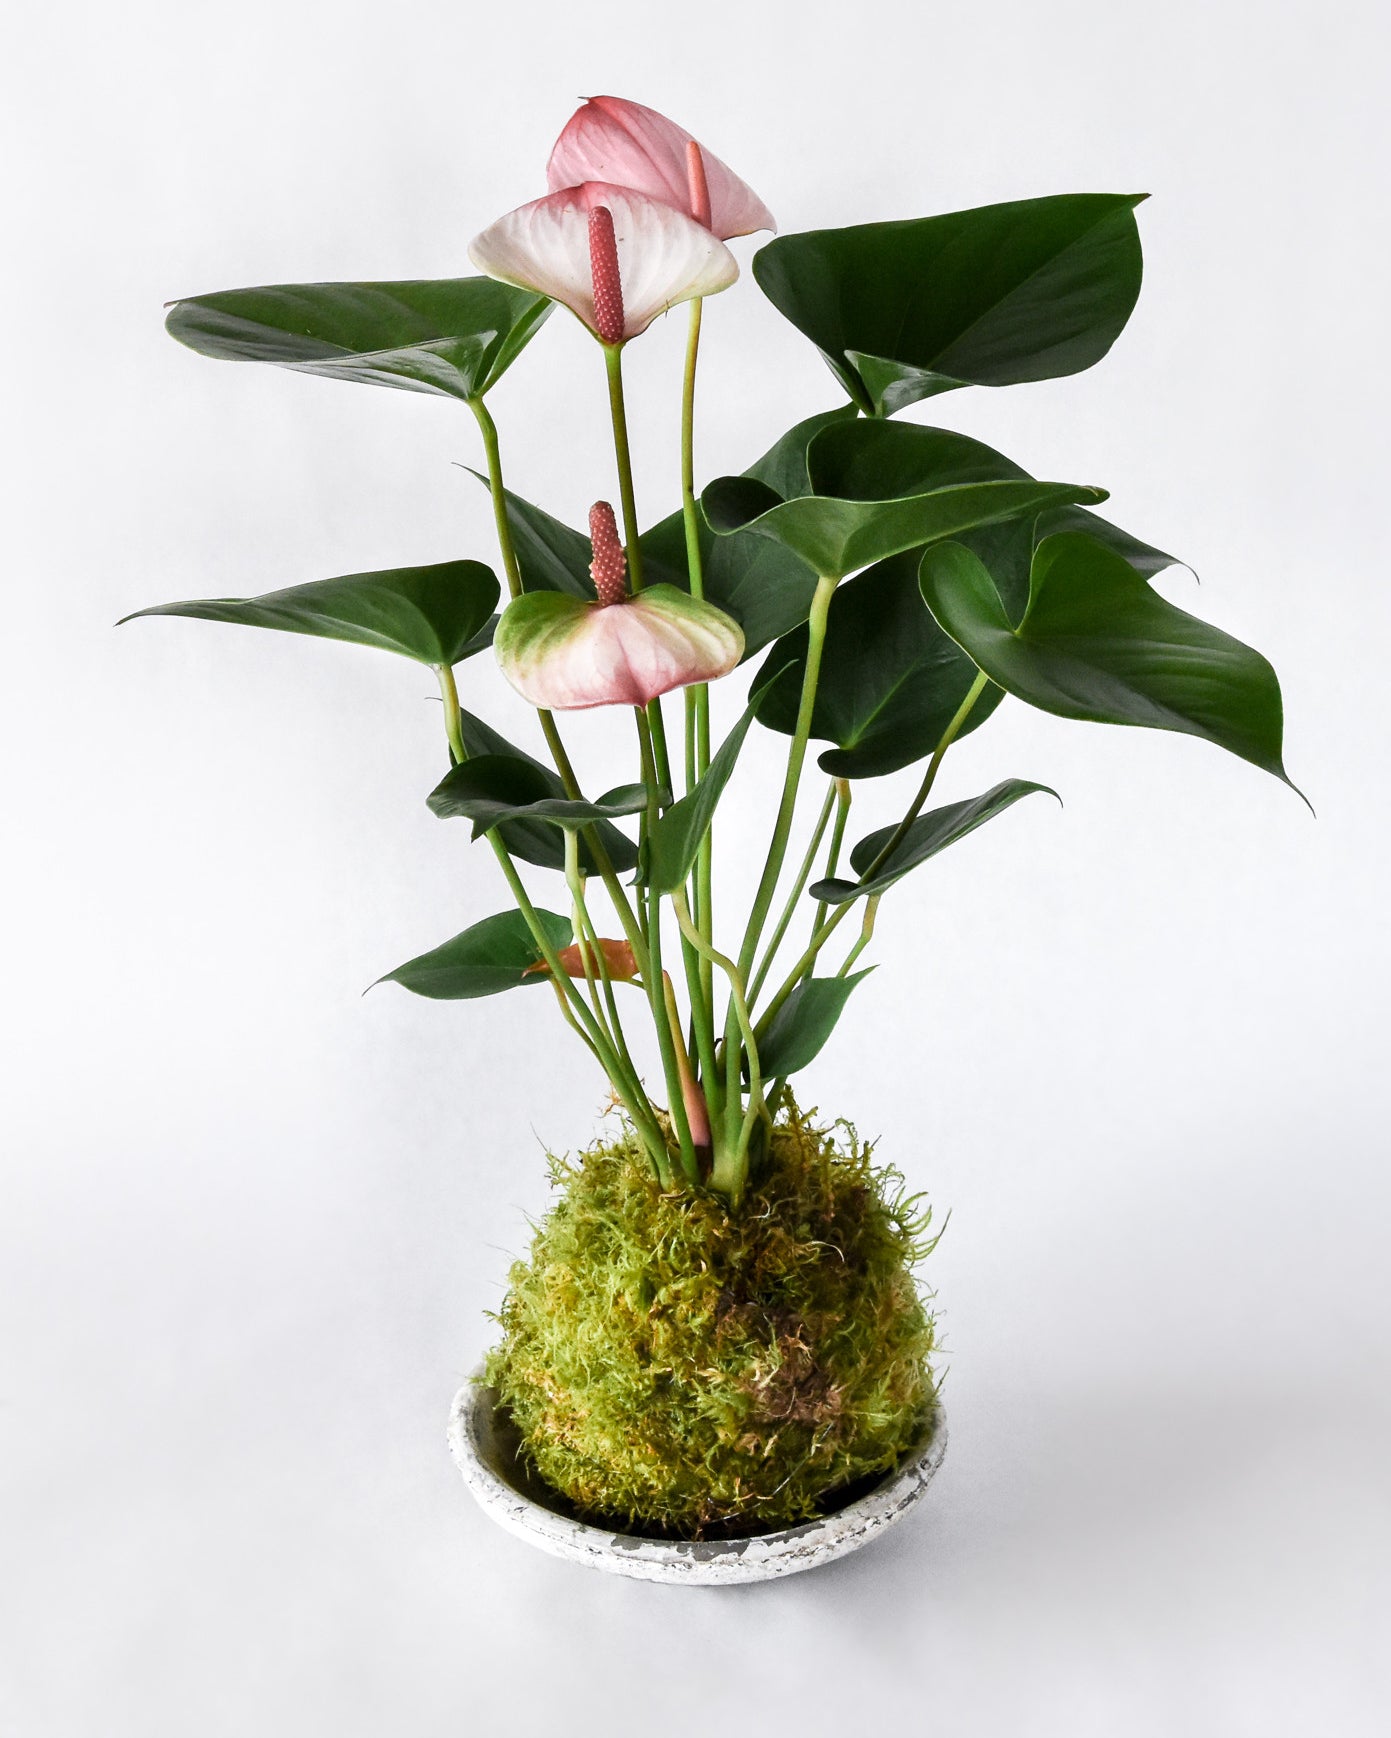 Anthurium plant with base wrapped in circular bright green moss ball on white background